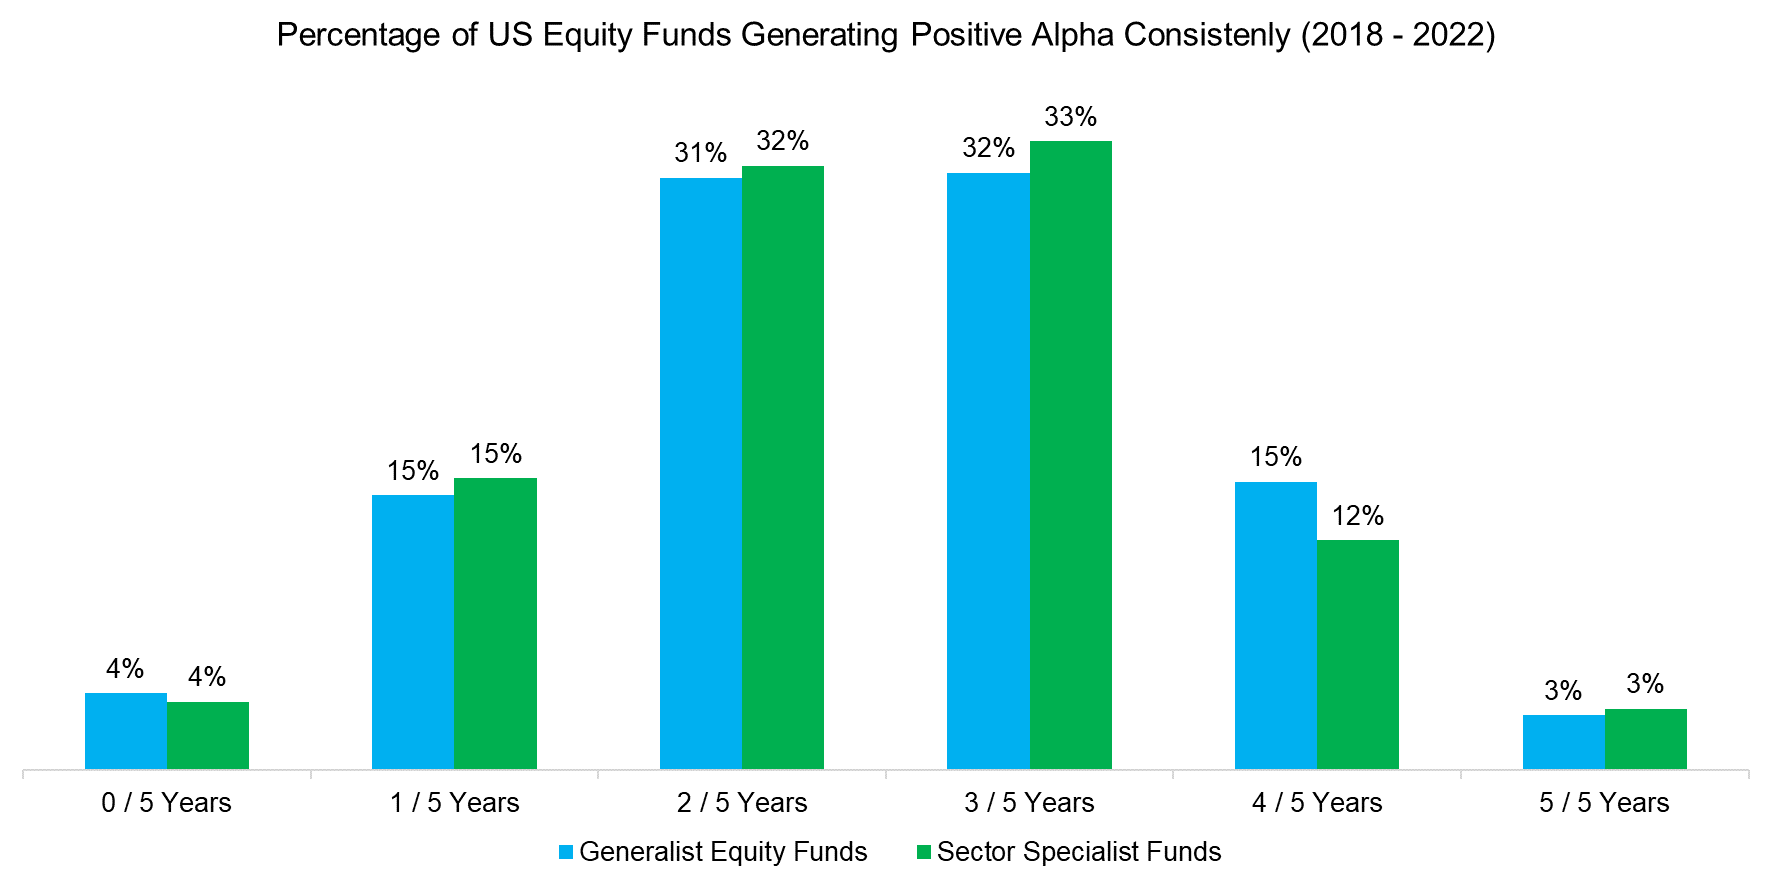 Percentage-of-US-Equity-Funds-Generating-Positive-Alpha-Consistenly-2018-2022